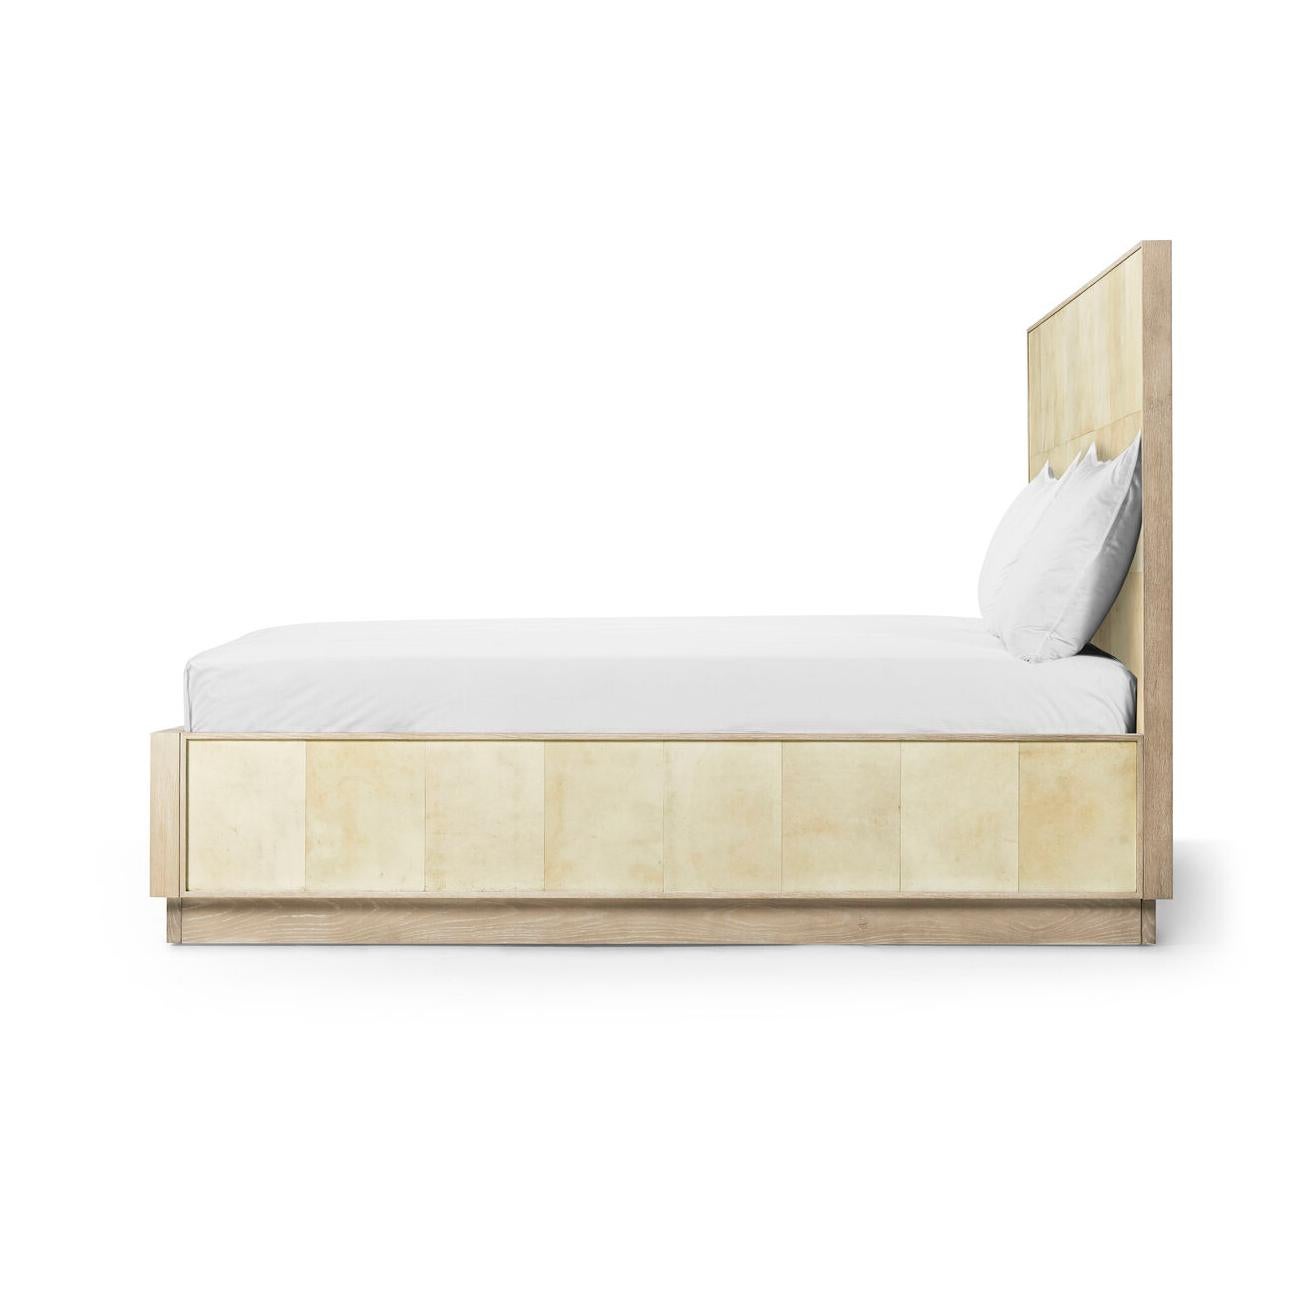 Vietnamese Organic Modern US King Bed For Sale